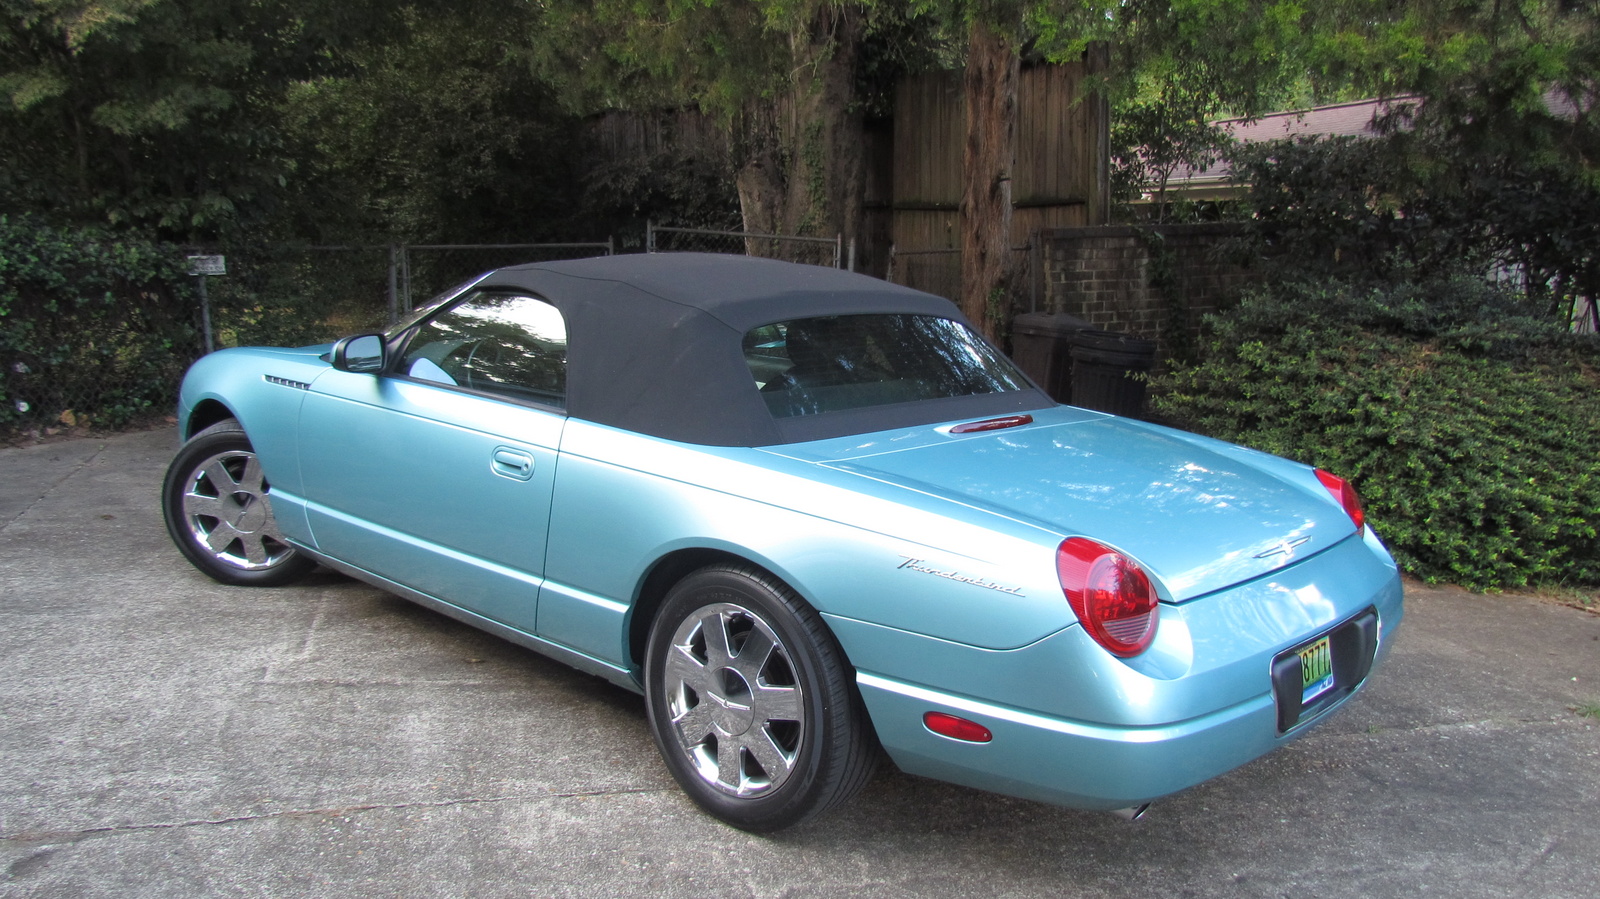 2002 Ford thunderbird convertible review #2